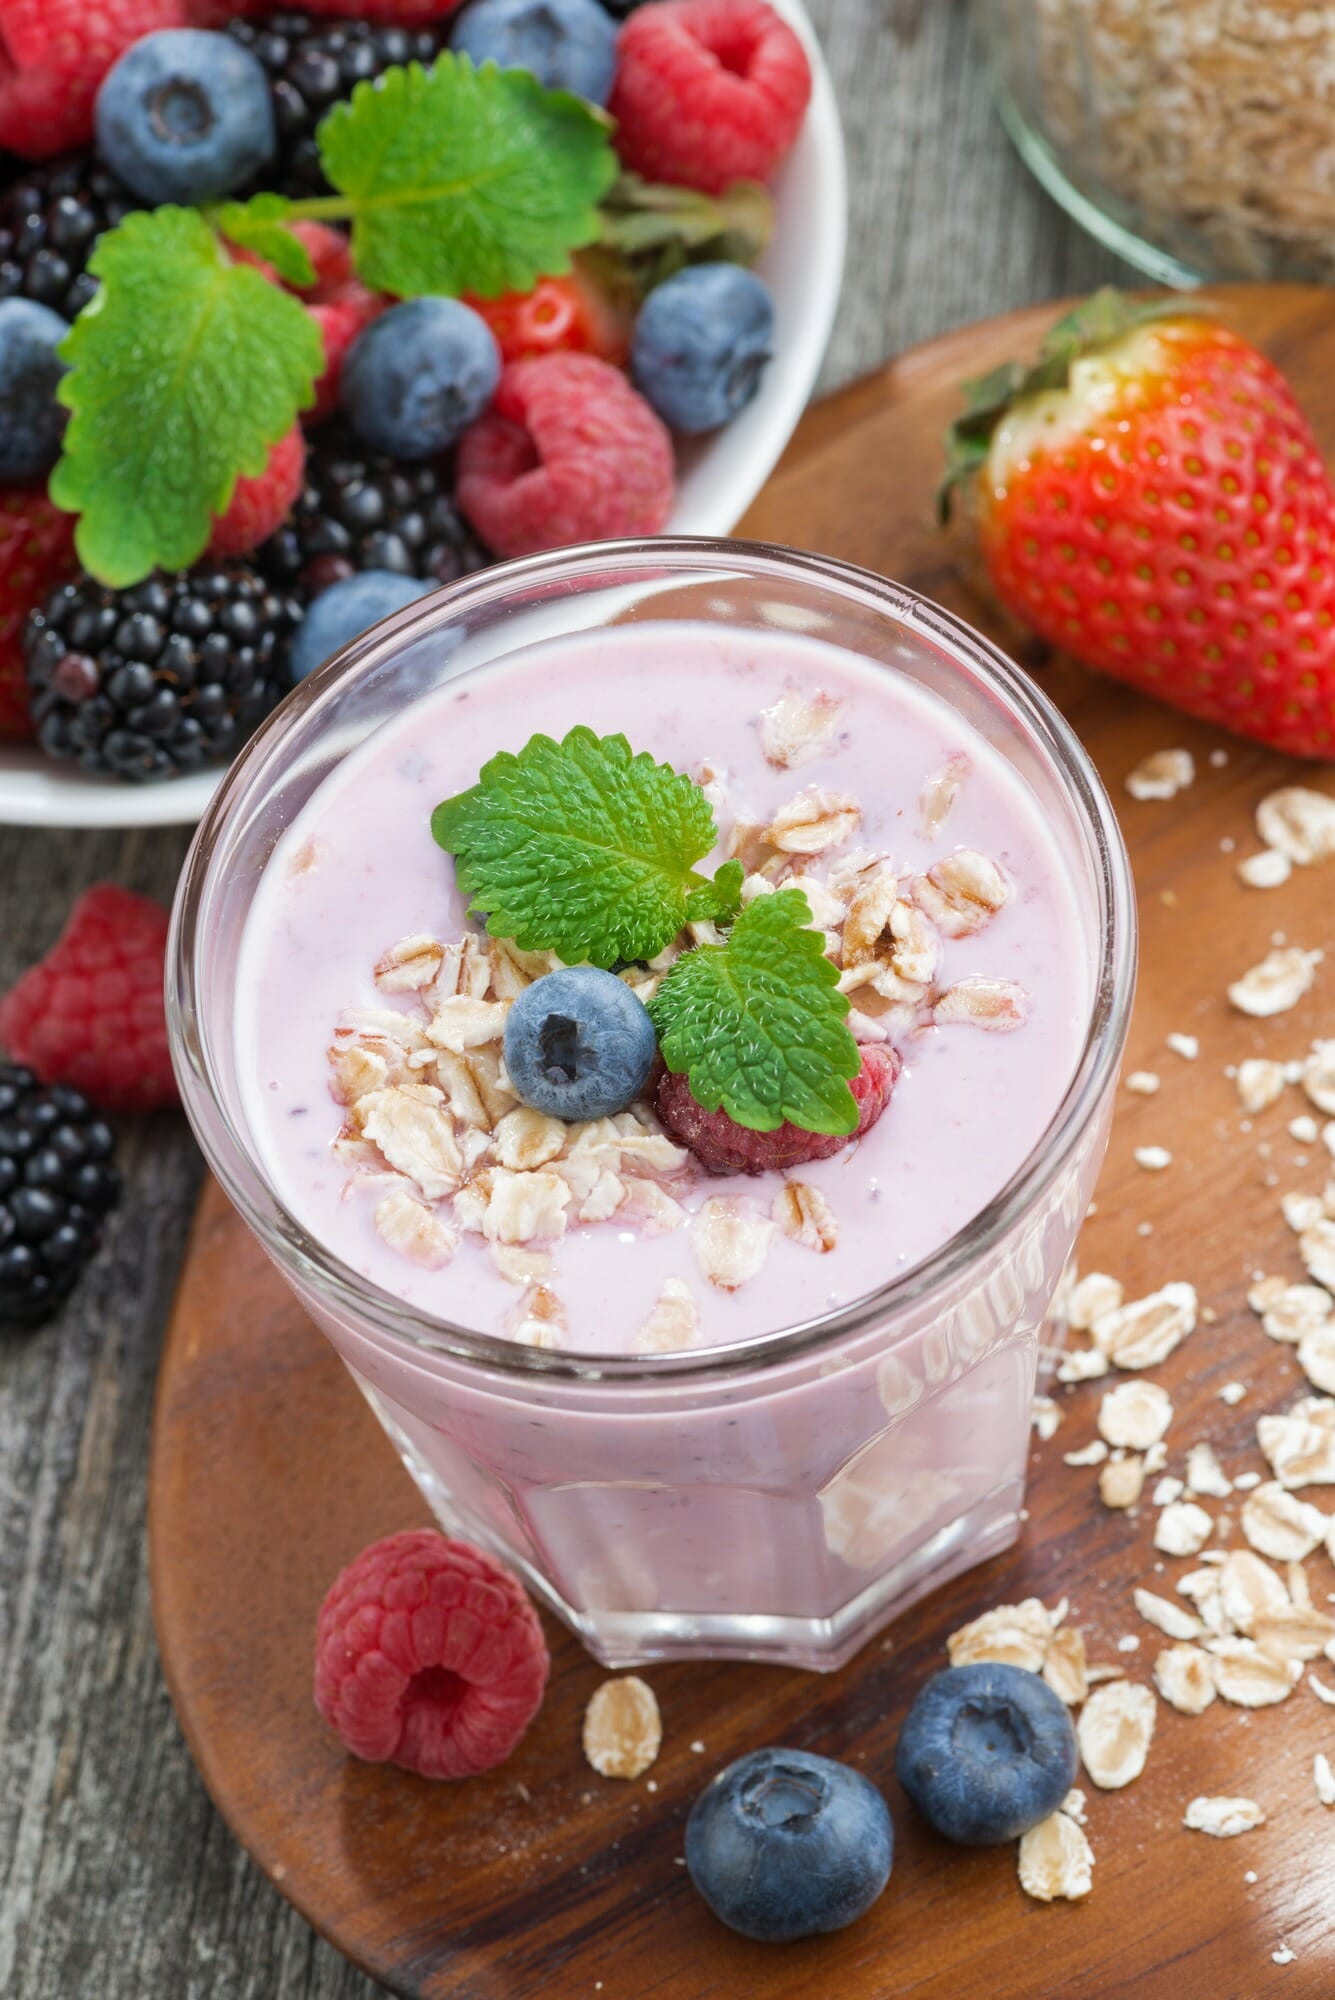 Healthy Smoothies For Breakfast
 15 Healthy Kid Friendly Breakfast Smoothies